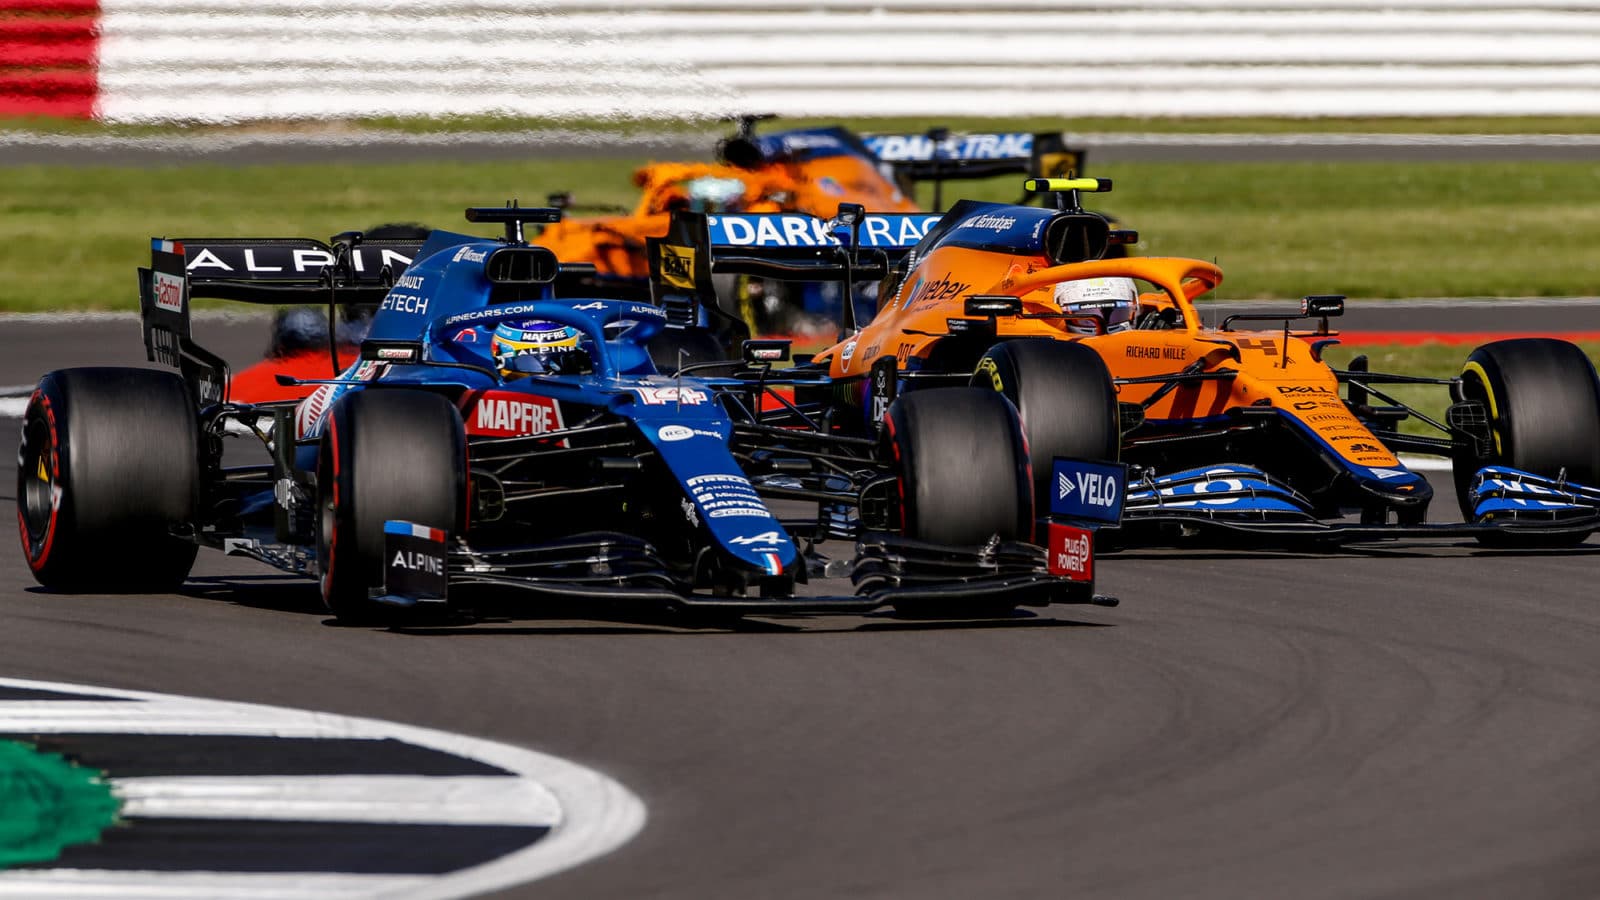 Fernando Alonso and Lando Norris in the 2021 British GP sprint race